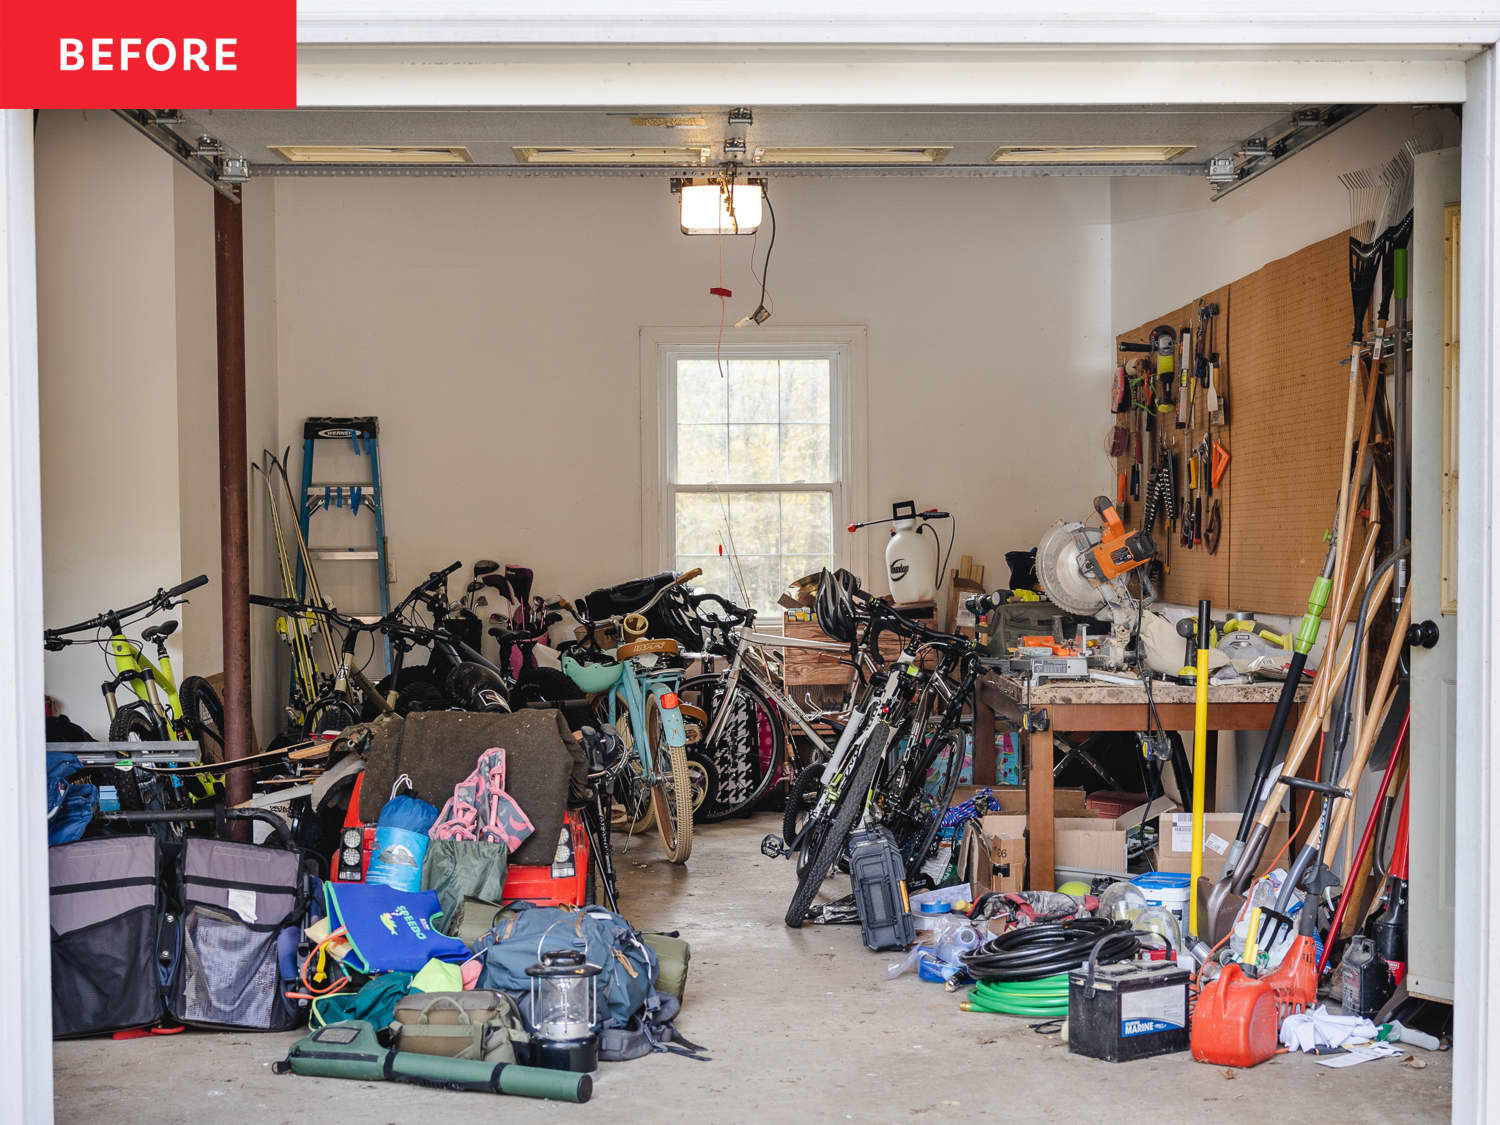 B&A: See This Cluttered Garage's Incredible Transformation